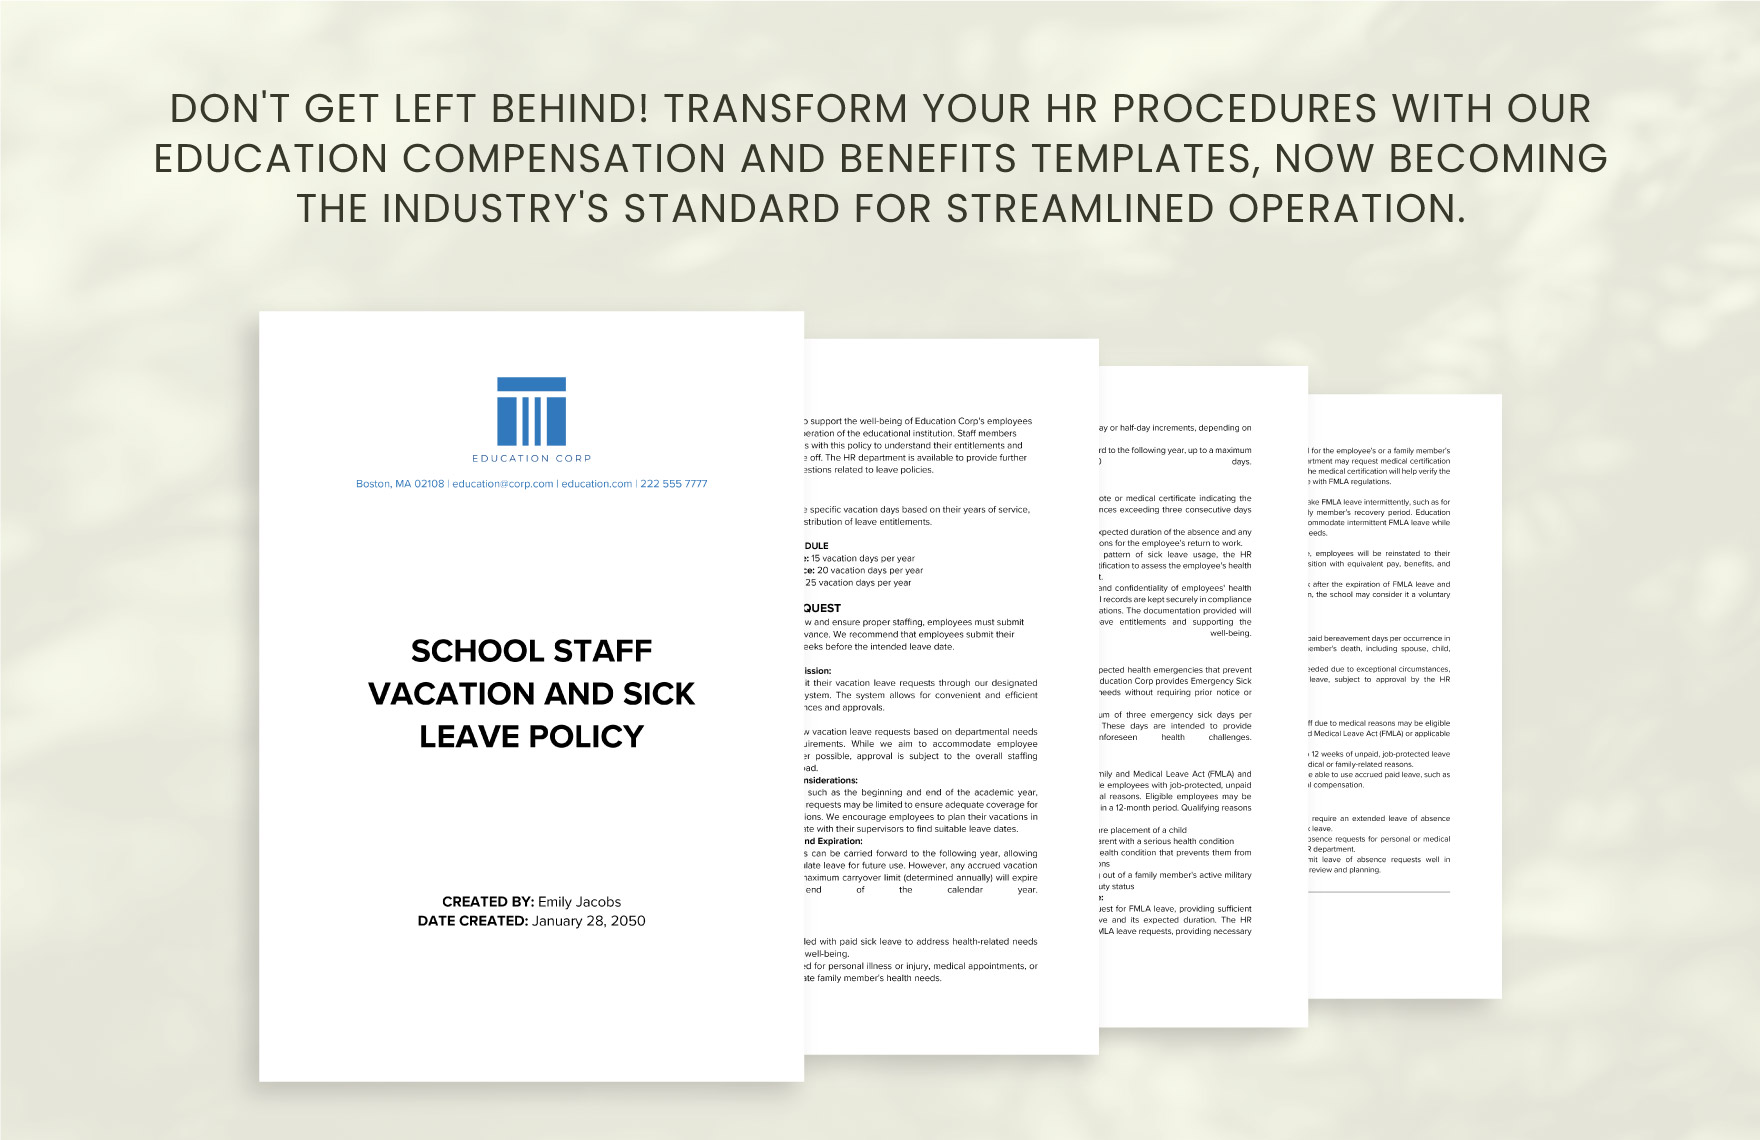 School Staff Vacation and Sick Leave Policy Template